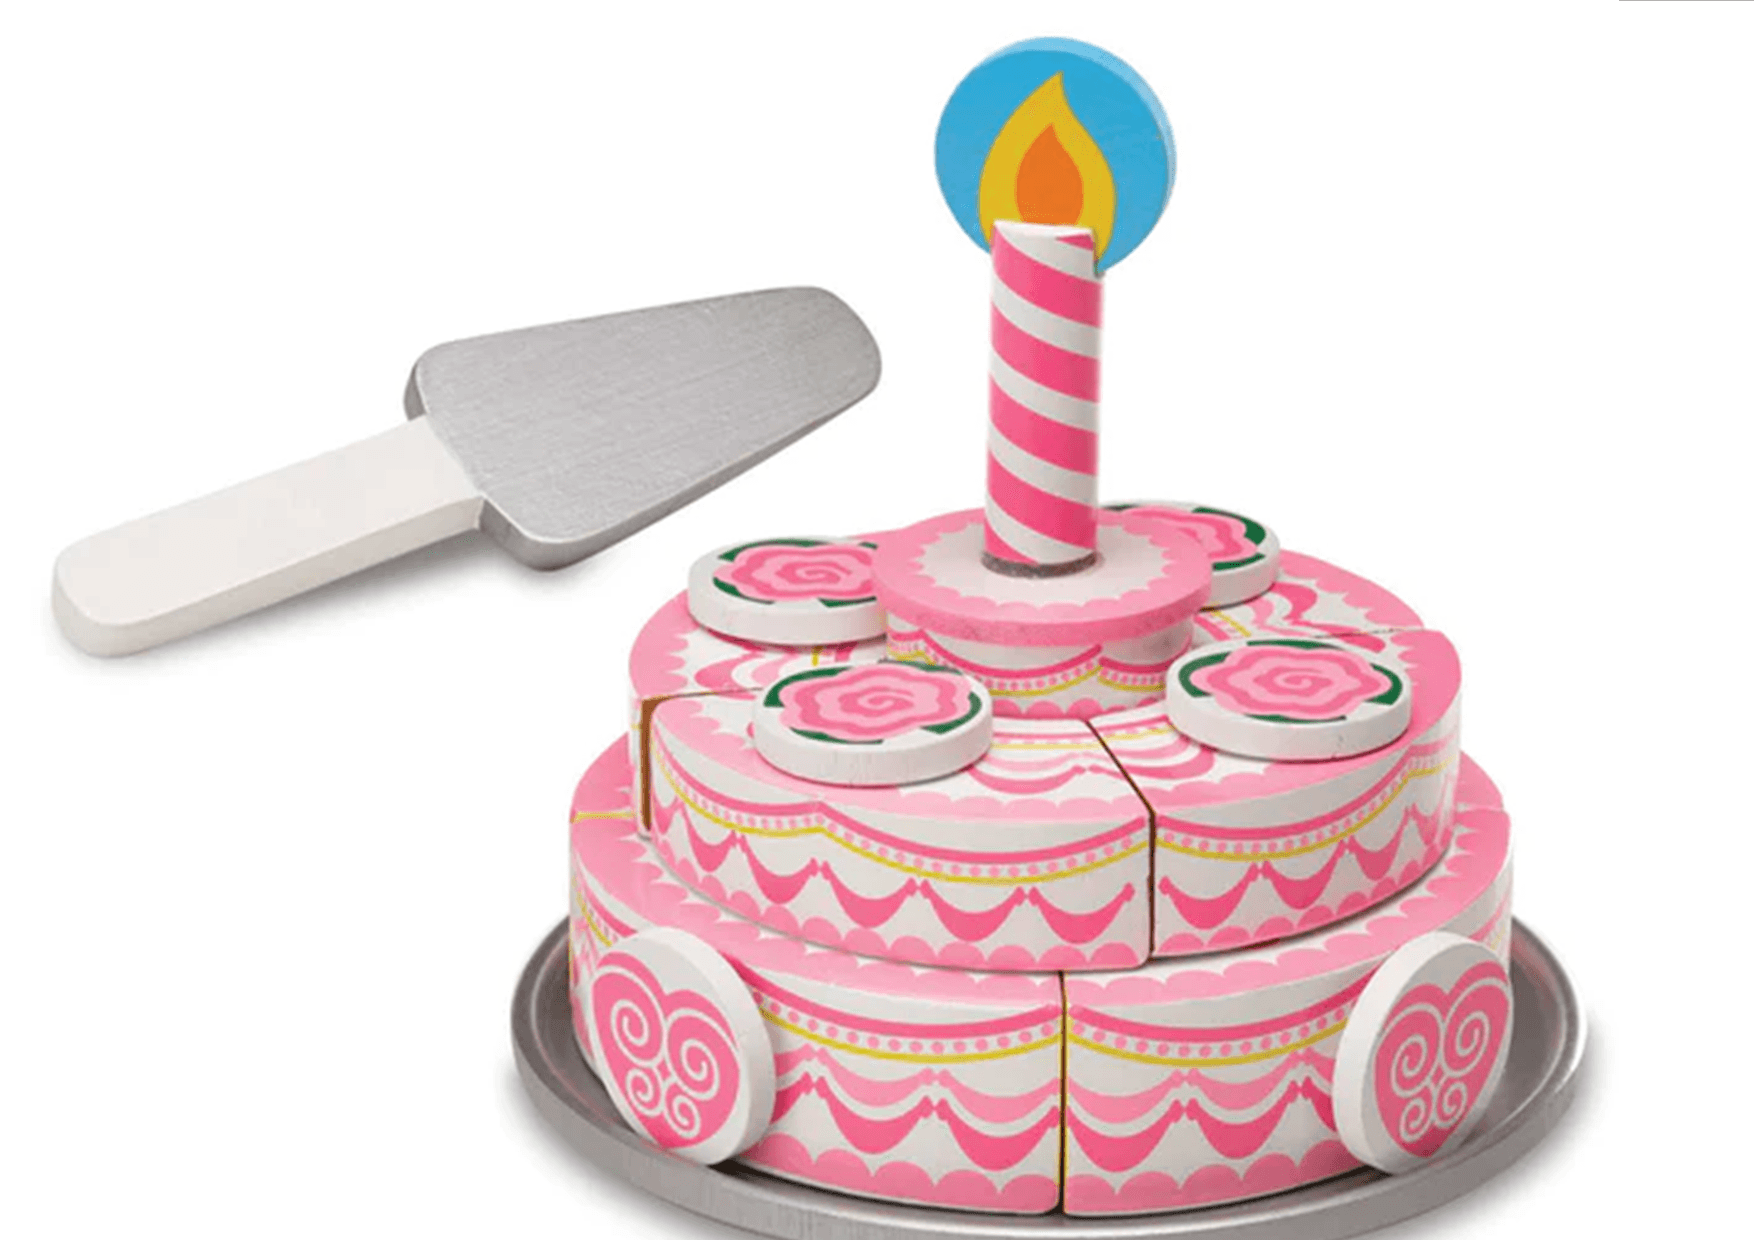 MELISSA & DOUG Triple-layer Party Cake - Wooden Play Food: With self-stick tabs on each piece, the wooden sections stick together easily then slice apart with the included wooden knife - 4069